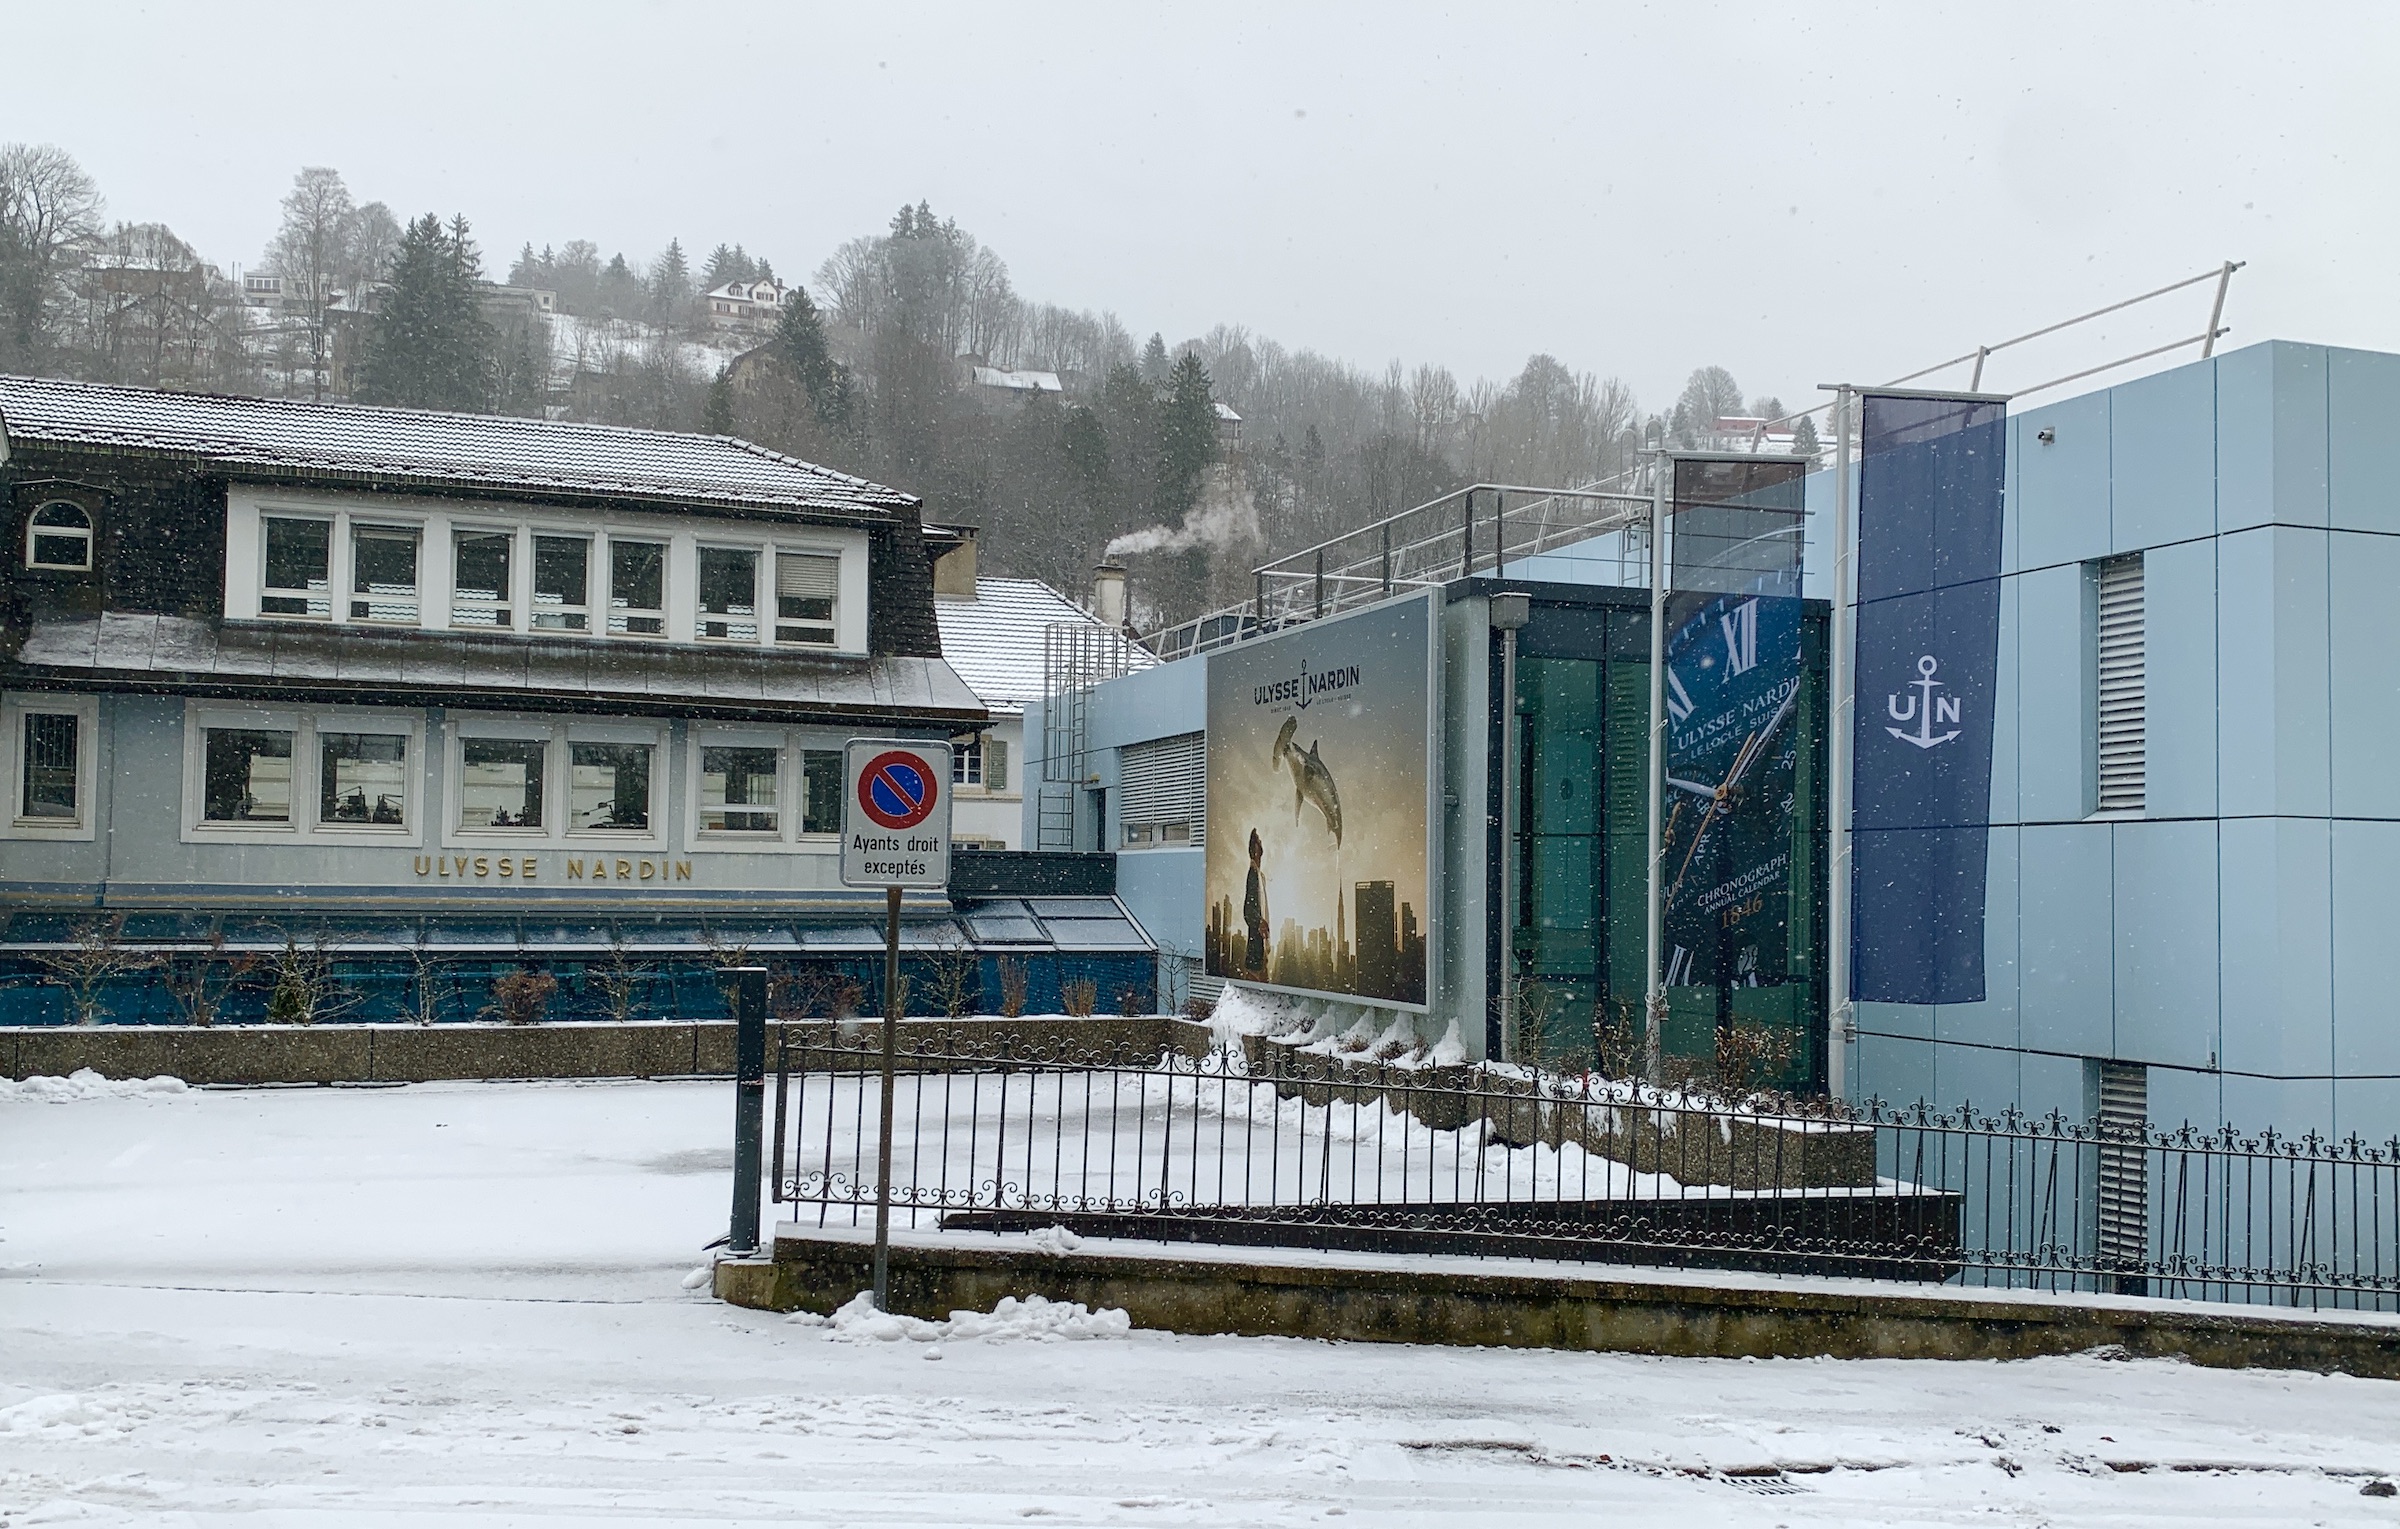 Building of the watch brand Ulysse Nardin in Le Locle